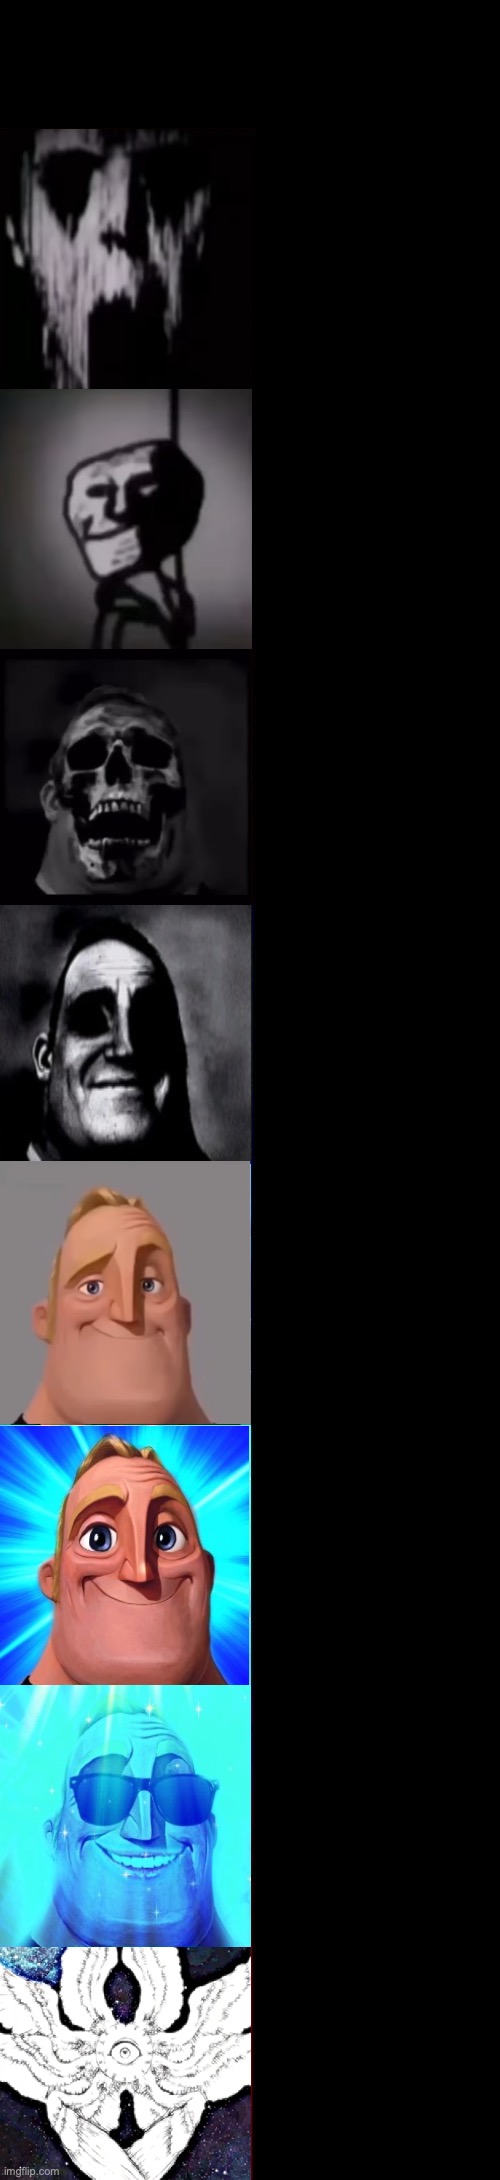 Mr incredible becoming uncanny to canny 8 panel Blank Meme Template